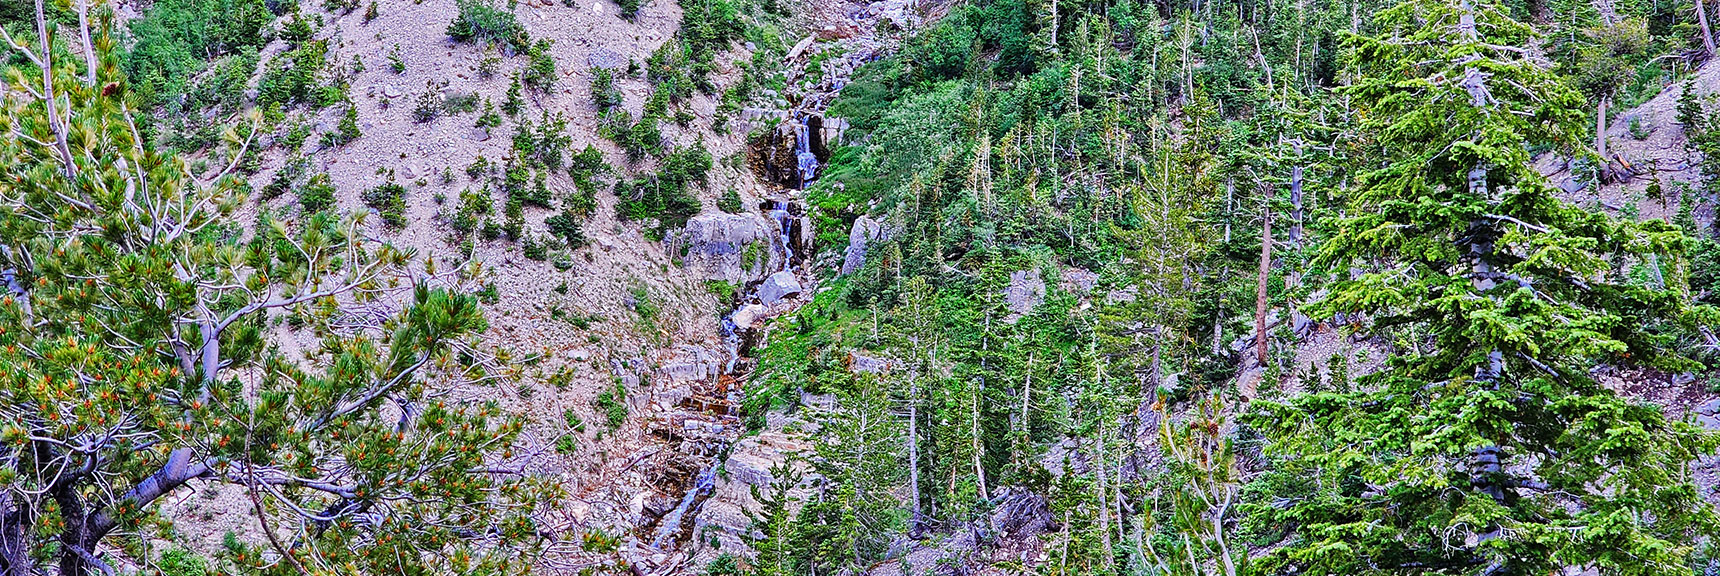 Beautiful Waterfalls Cascading Down the Gully, Will Disappear Beneath the Surface Below. | Fletcher Canyon Trailhead to Harris Mountain Summit to Griffith Peak Summit Circuit Adventure | Mt. Charleston Wilderness, Nevada